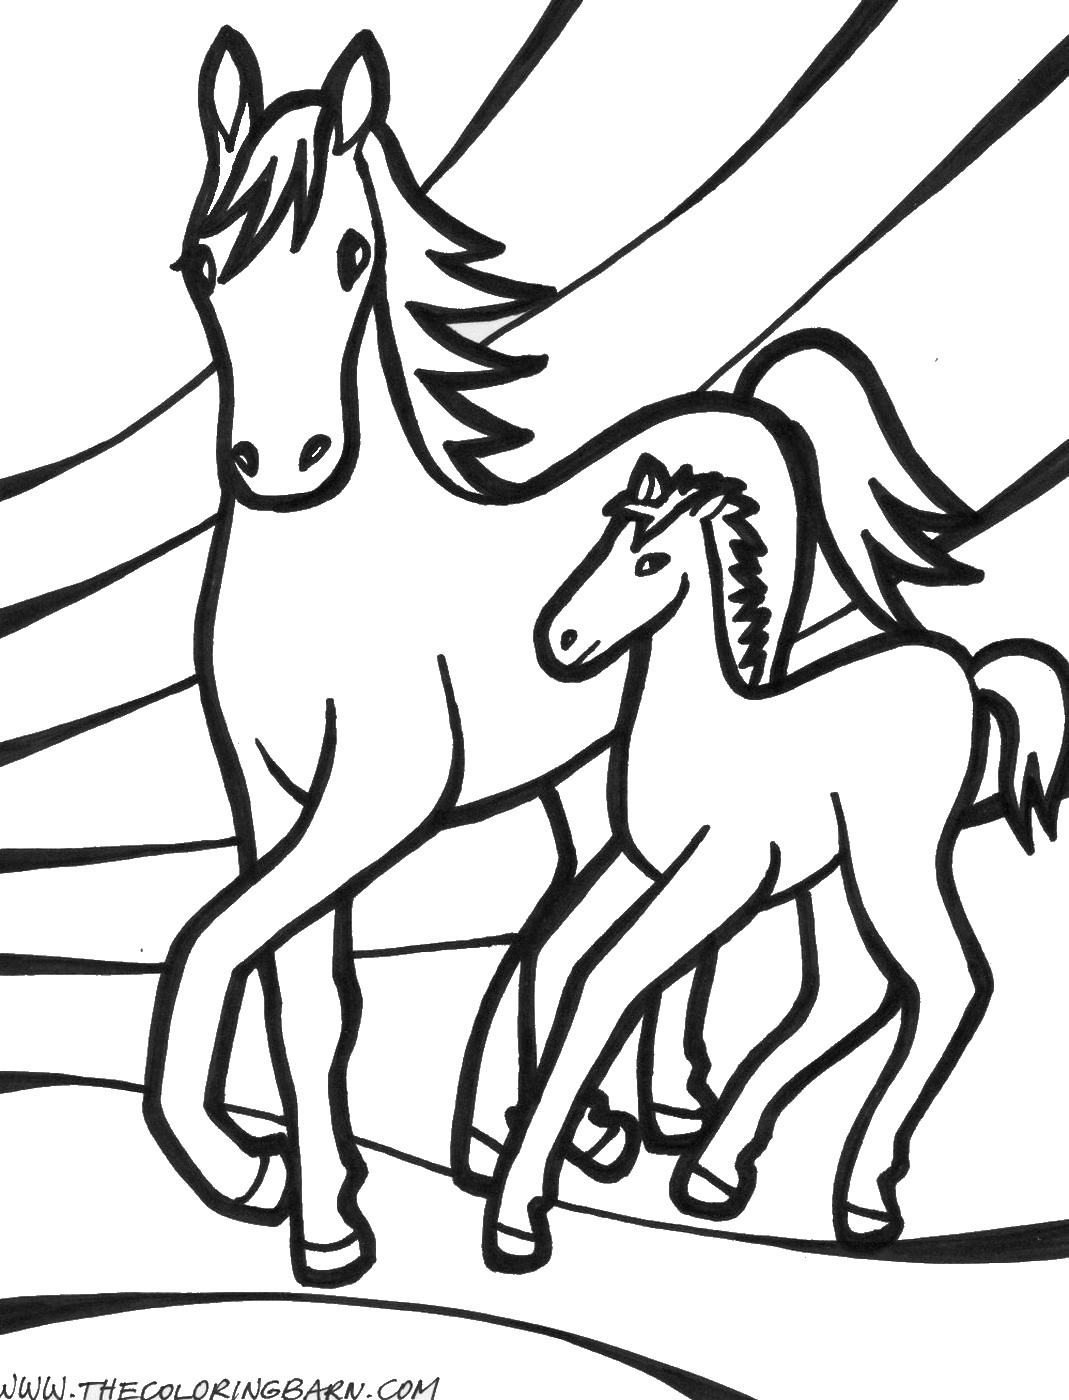 Horse coloring pages â birthday printable